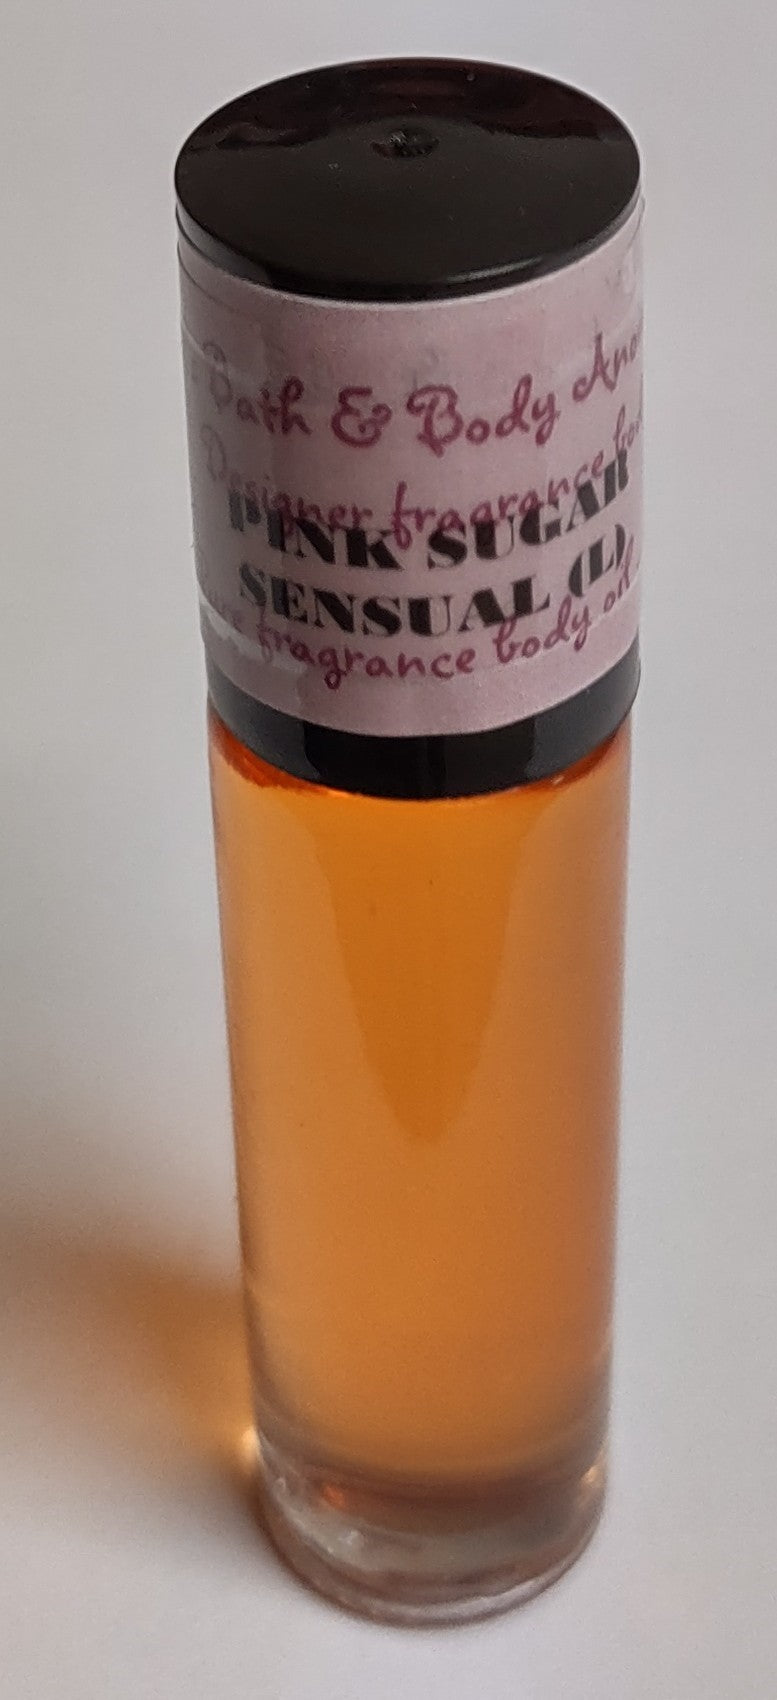 Pink Sugar Sensual for women - our impression.